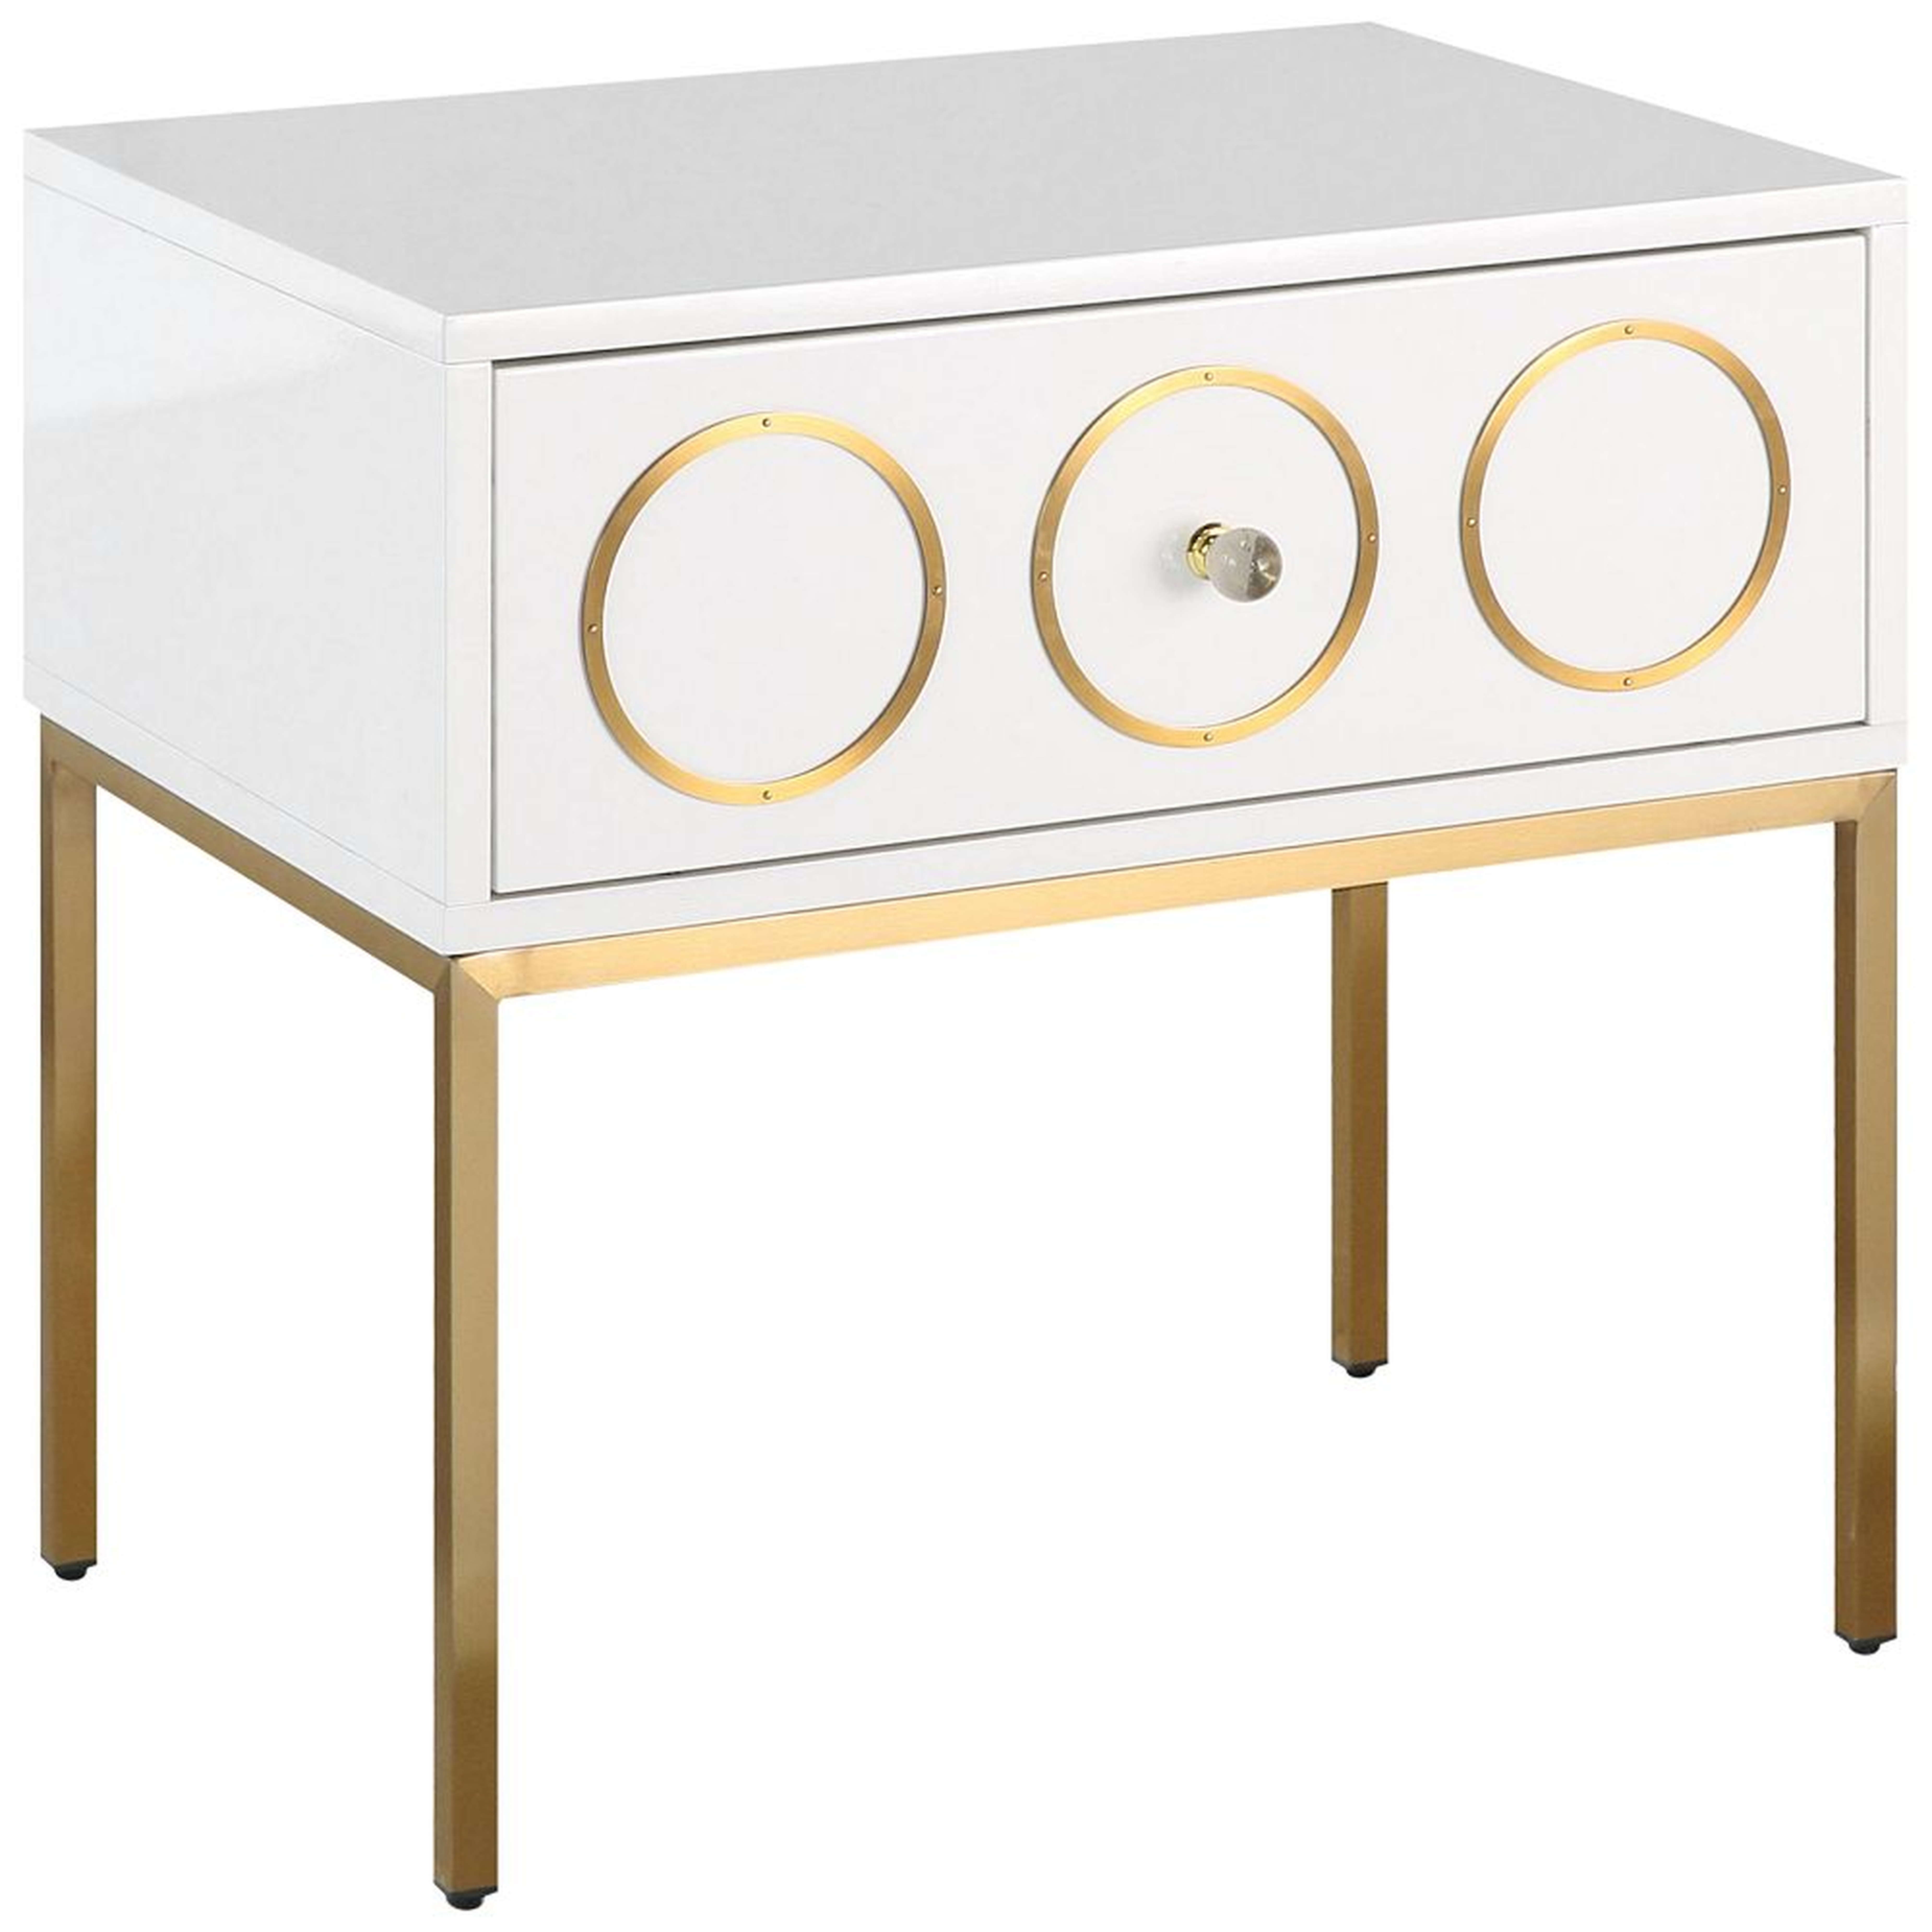 Ella High Gloss White Lacquer and Brushed Gold Side Table - Style # 34P16 - Lamps Plus